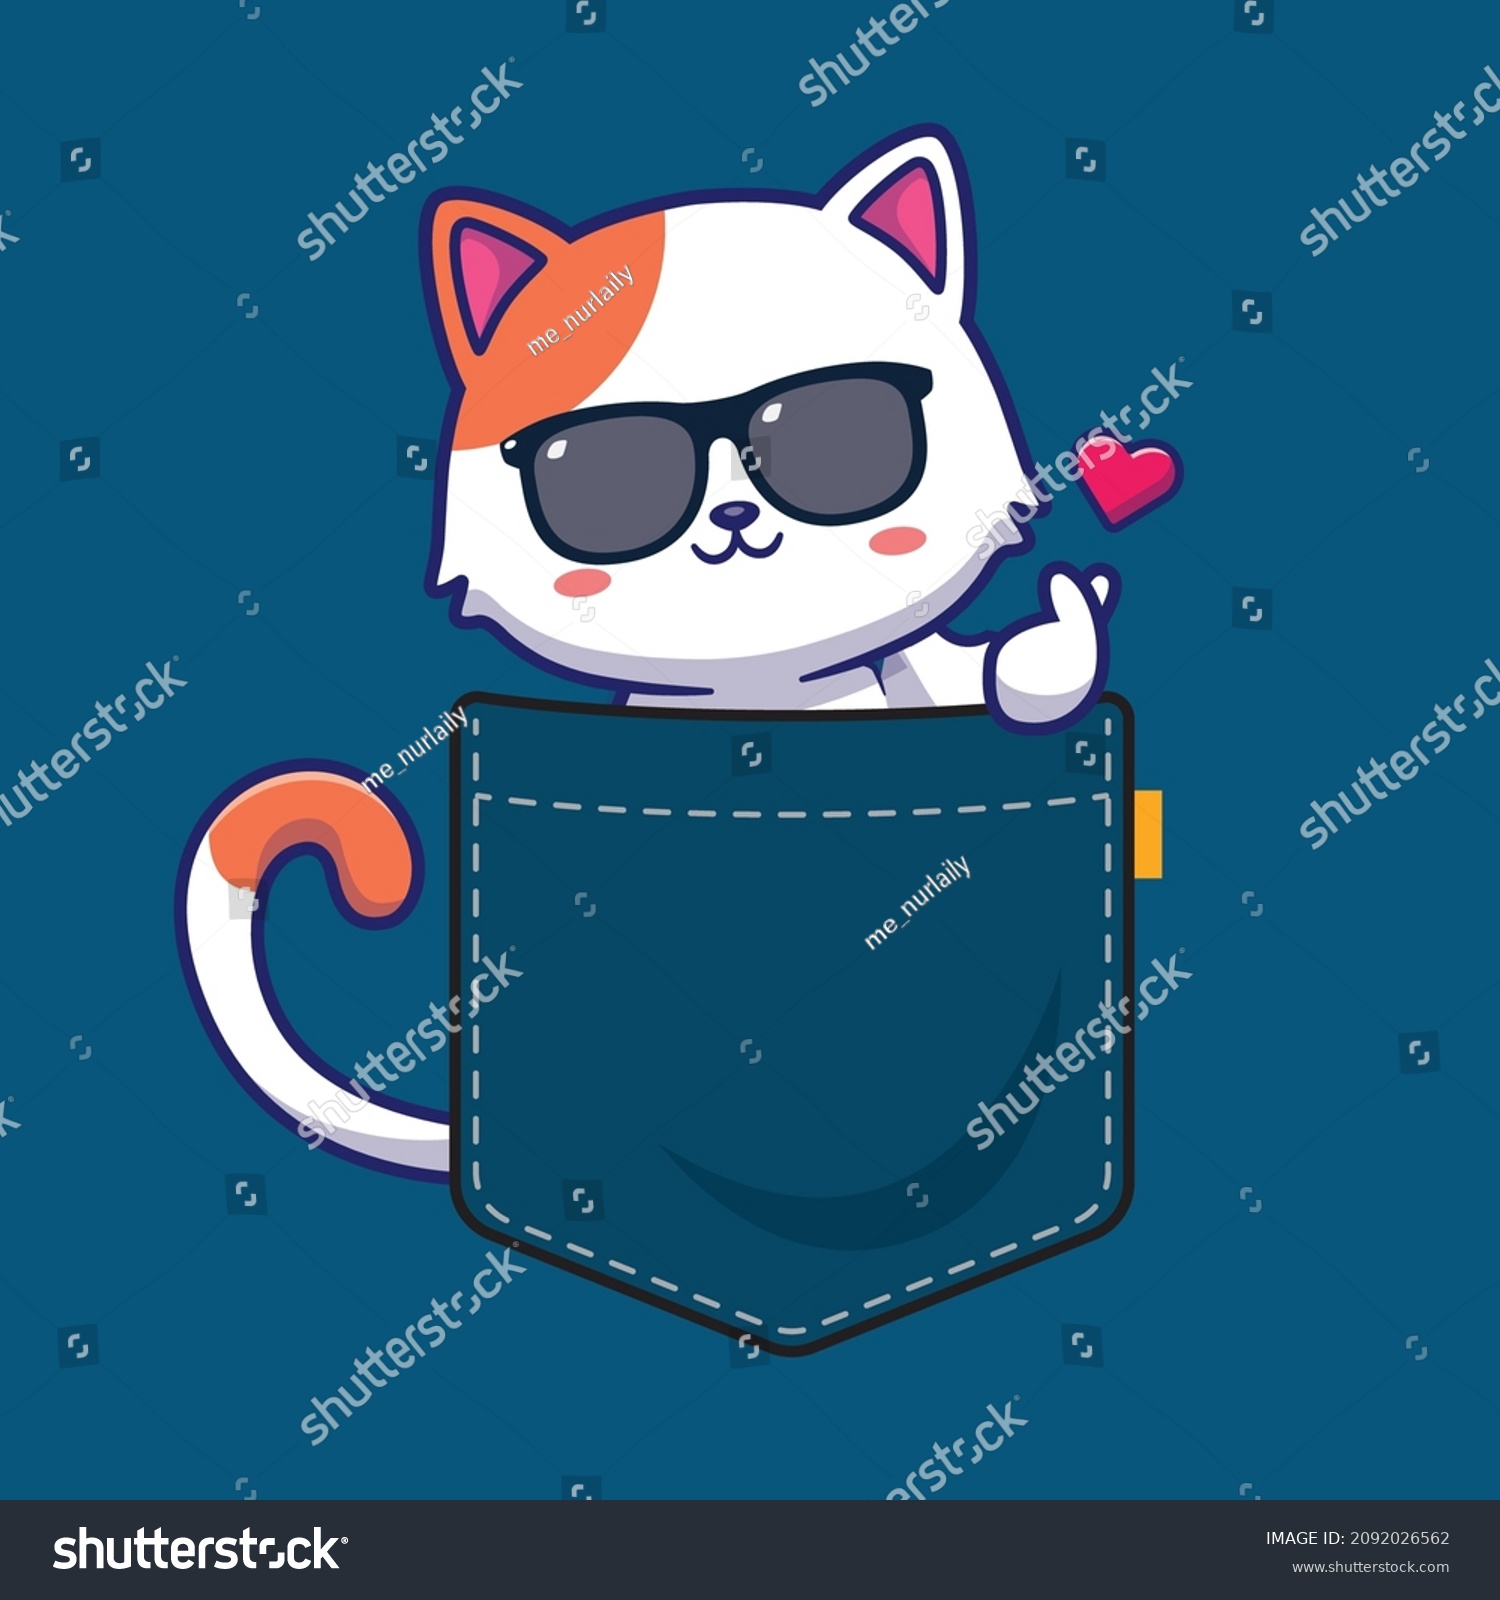 SVG of Pocket Cat. Cute print with kitty for t-shirt design, baby shower, greeting card. Vector Illustration. svg